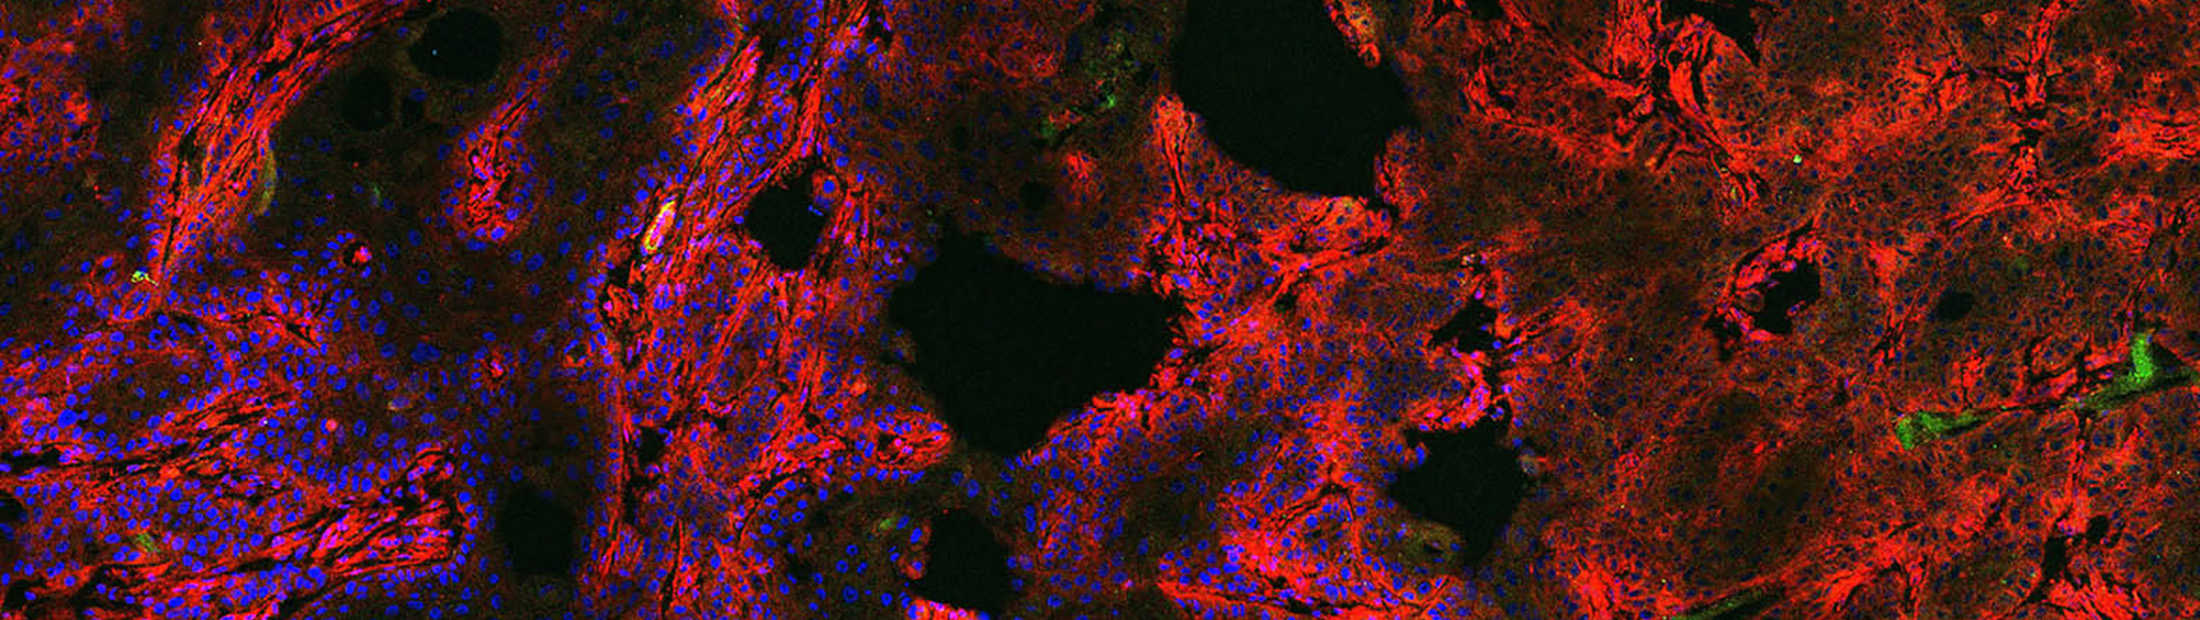 a microscopic image of a human tumor xenograft with a fluorescent red dye that reveals cancerous cells on tumors